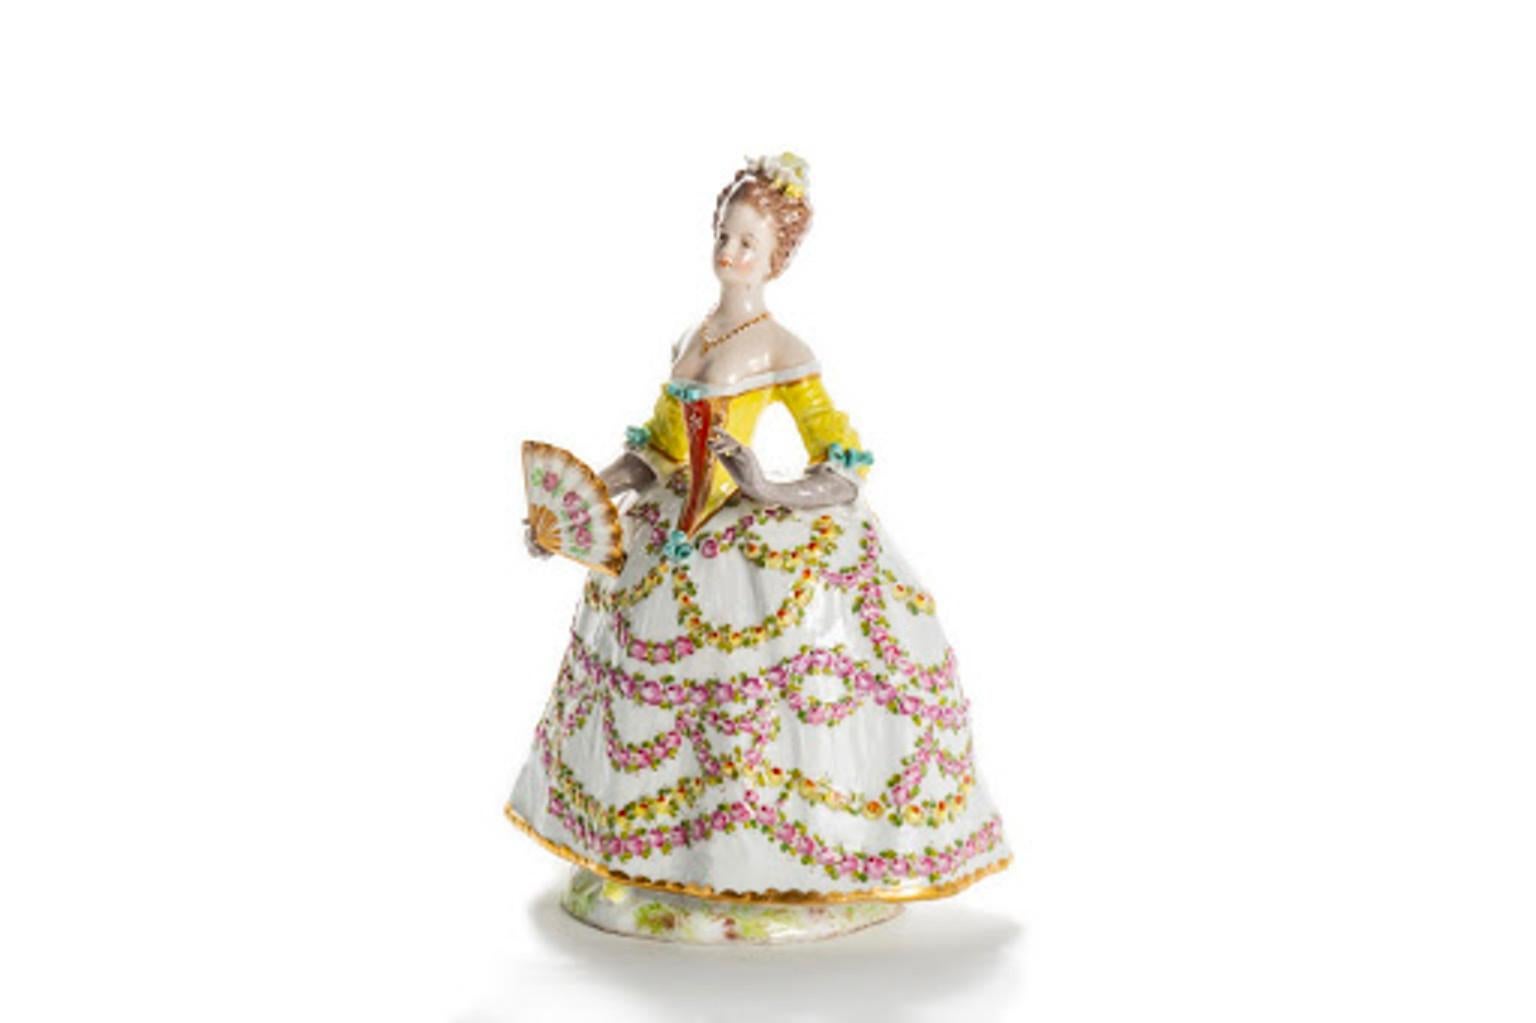 German,
Late 18th-early 19th century
Meissen, Mascolini (1774-1814)
Porcelain
Mark for Meissen

Measures: Height 22 cm
Width 15 cm

Price US$8,500.